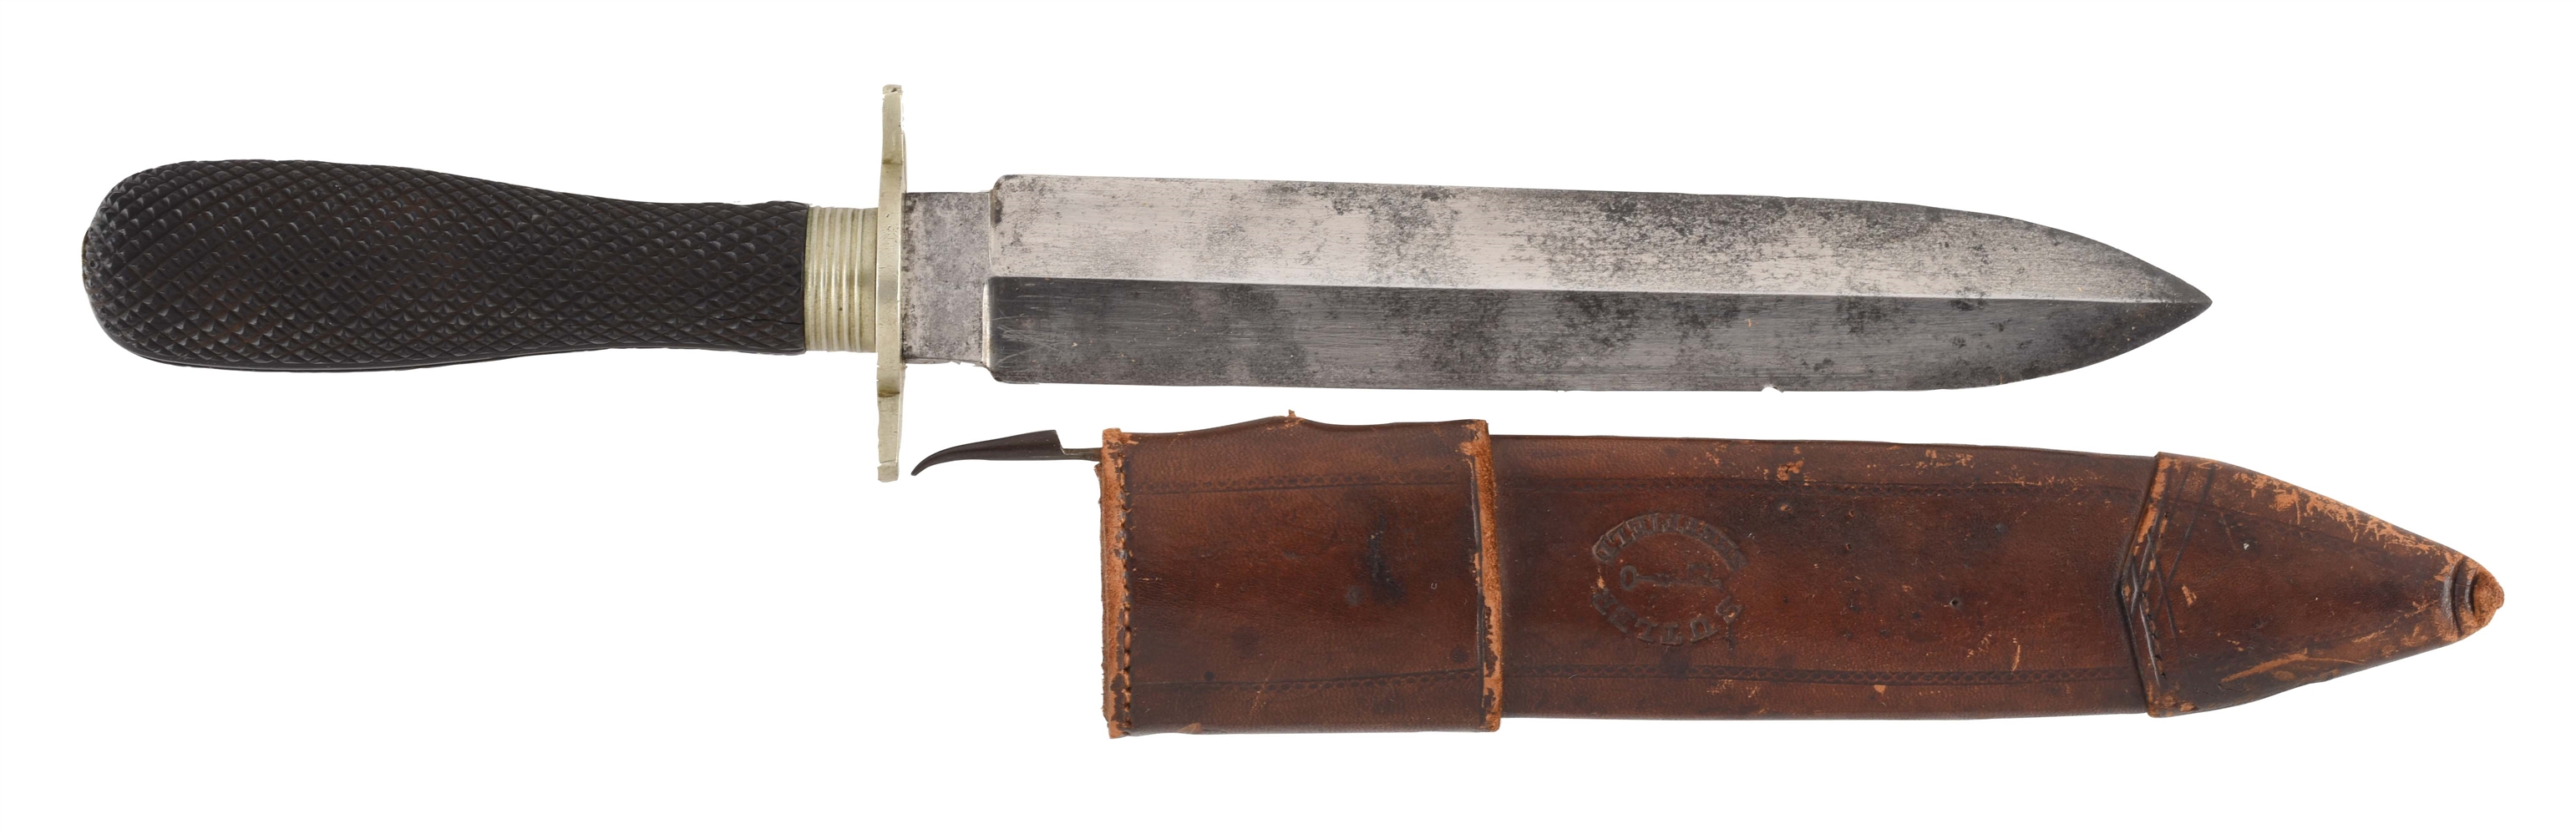 GEORGE BUTLER SPEAR-POINT ENGLISH BOWIE KNIFE WITH MATCHING SHEATH.